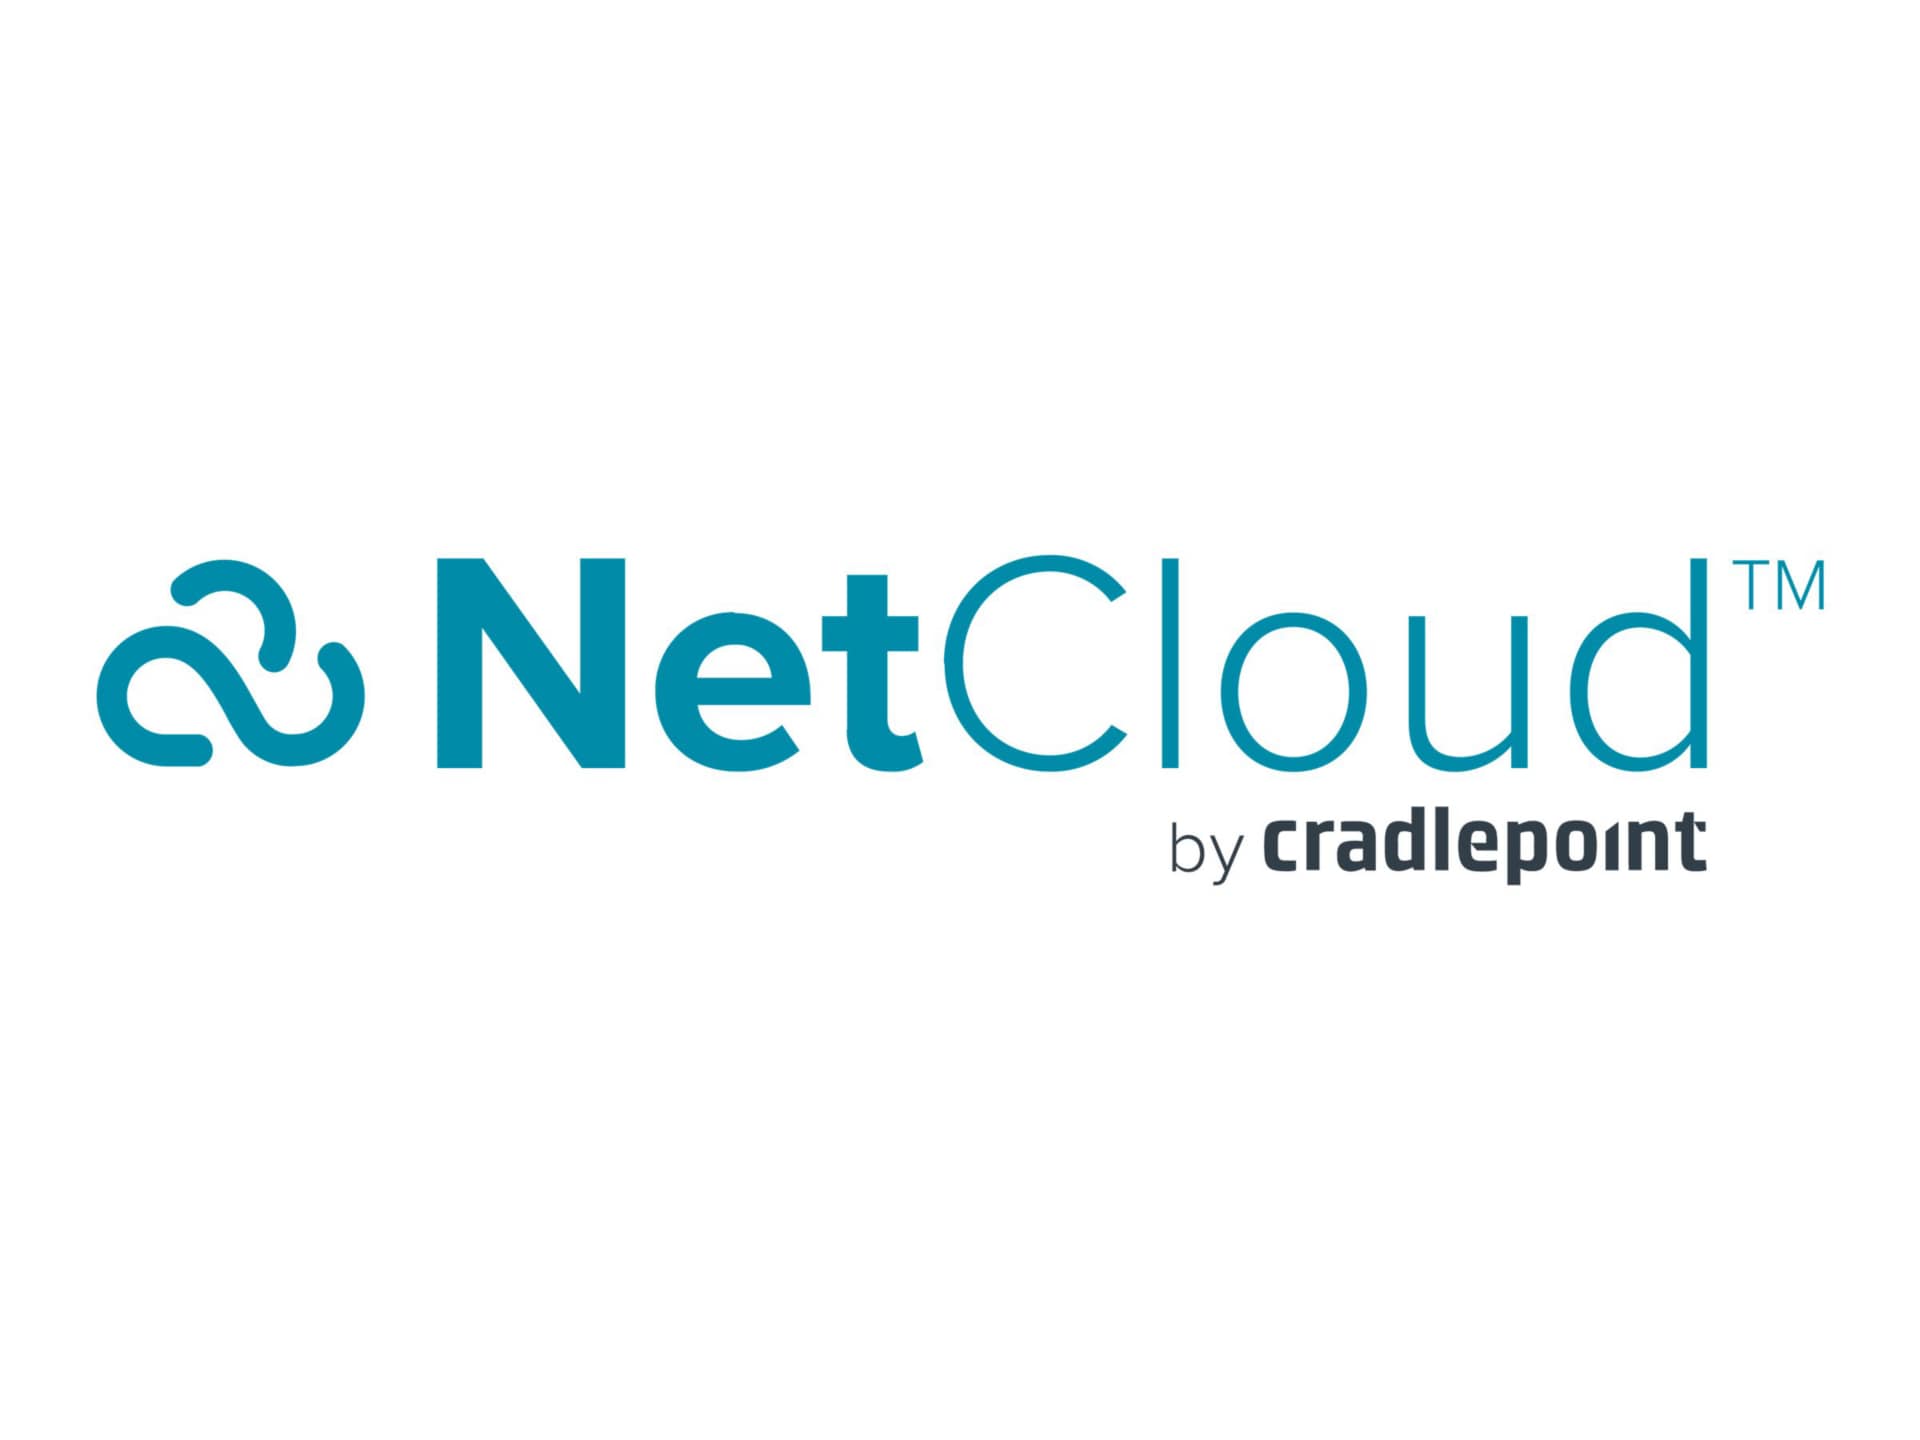 Cradlepoint NetCloud IoT Essentials + Advanced - subscription license (3 years) - 1 license - with IBR600C-150M-D router